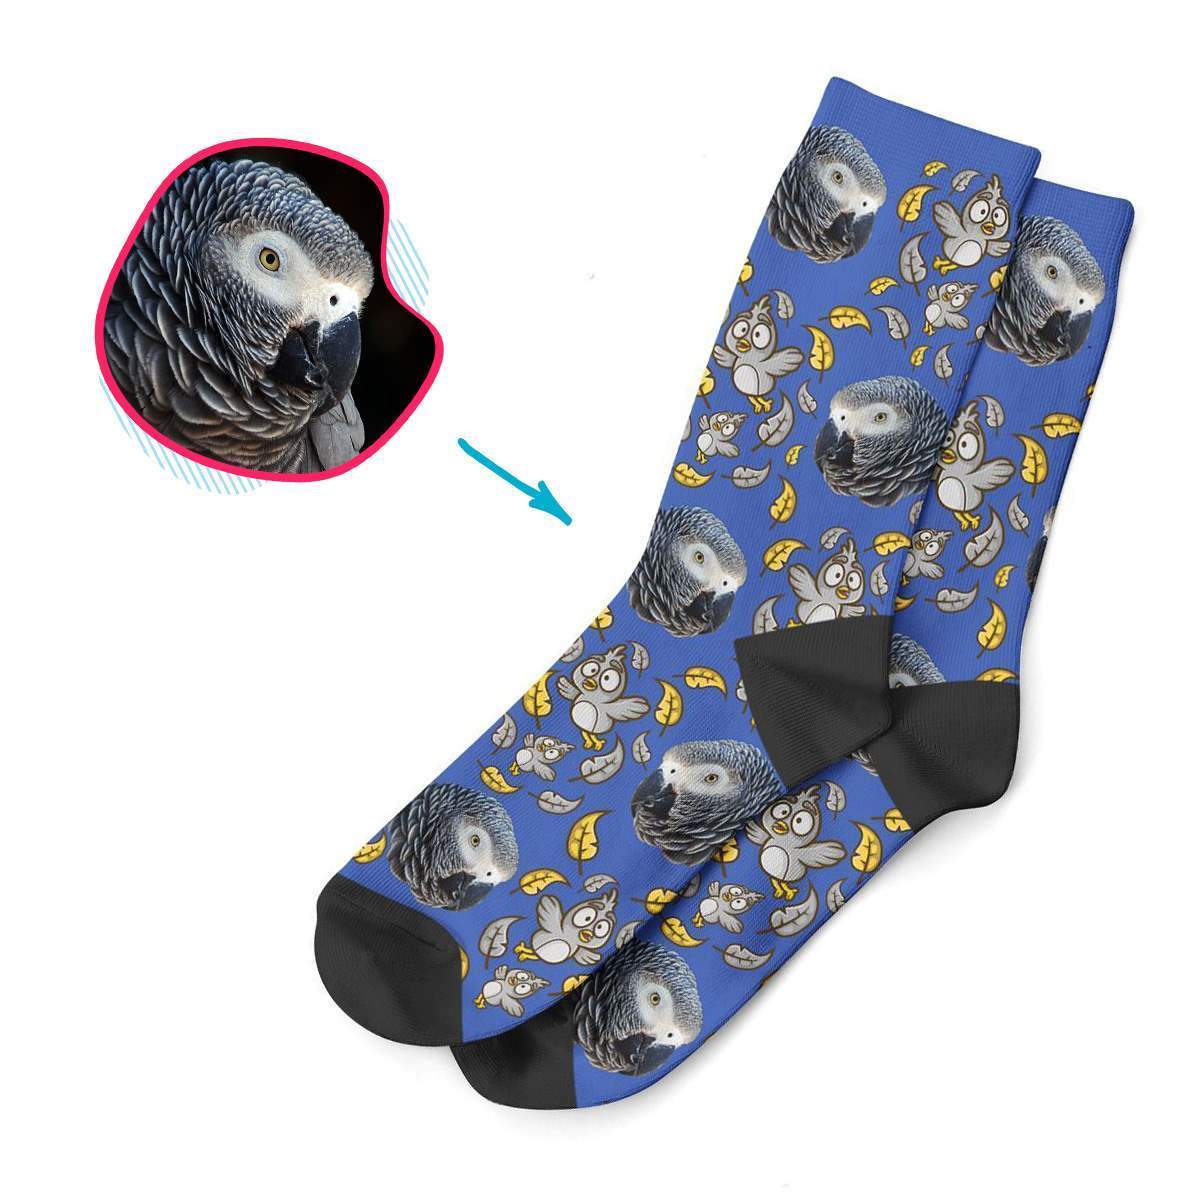 darkblue Bird socks personalized with photo of face printed on them